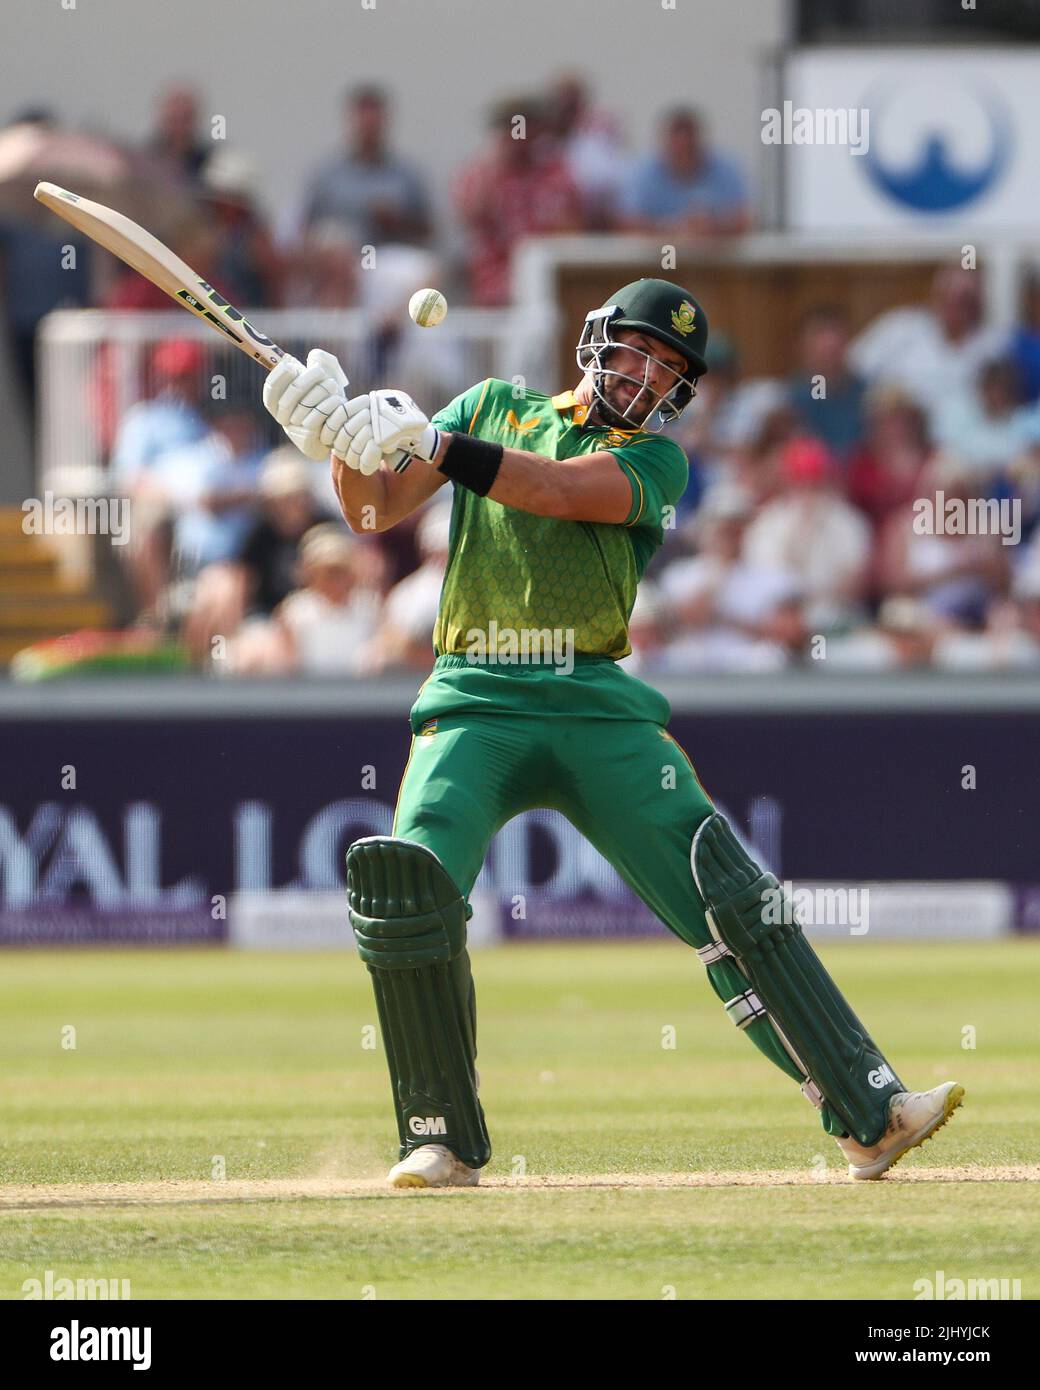 Aiden Markram of South Africa during the Royal London One Day Series match between England and South Africa at the Seat Unique Riverside, Chester le Street on Tuesday 19th July 2022. (Credit: Mark Fletcher | MI News) Stock Photo